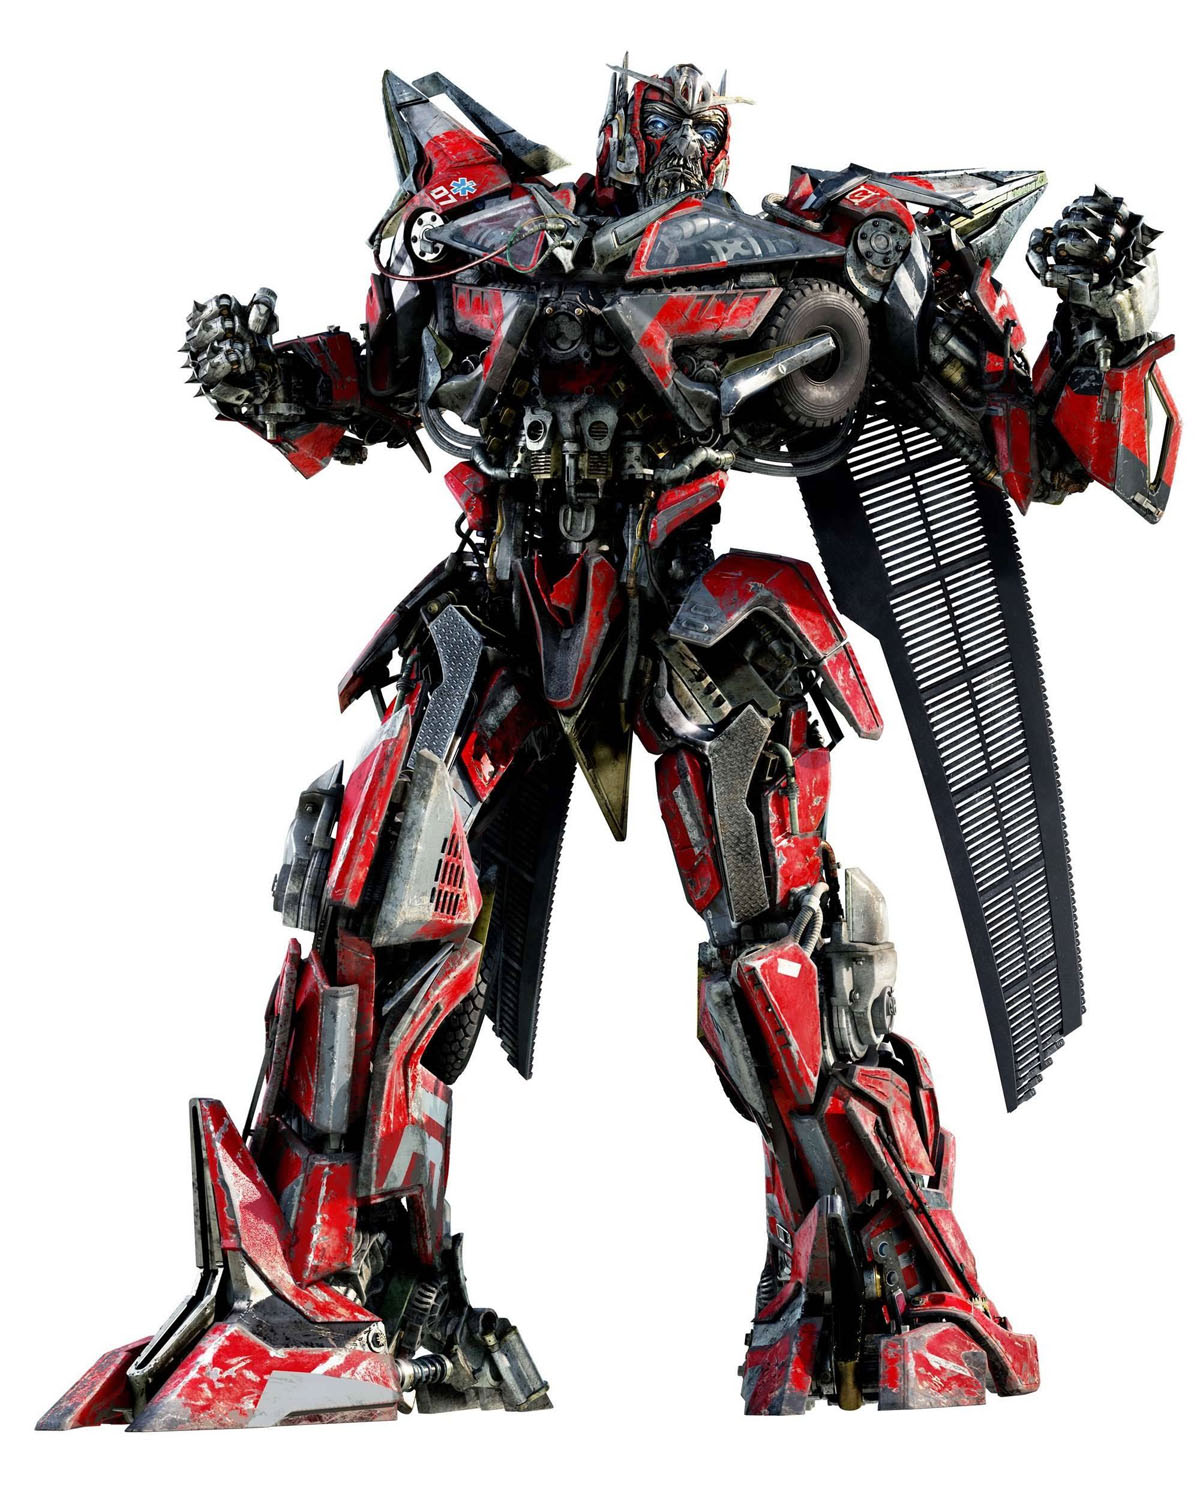 http://whatswithjeff.com/wp-content/uploads/2011/08/sentinel_prime_transformers_3_dark_of_the_moon.jpg